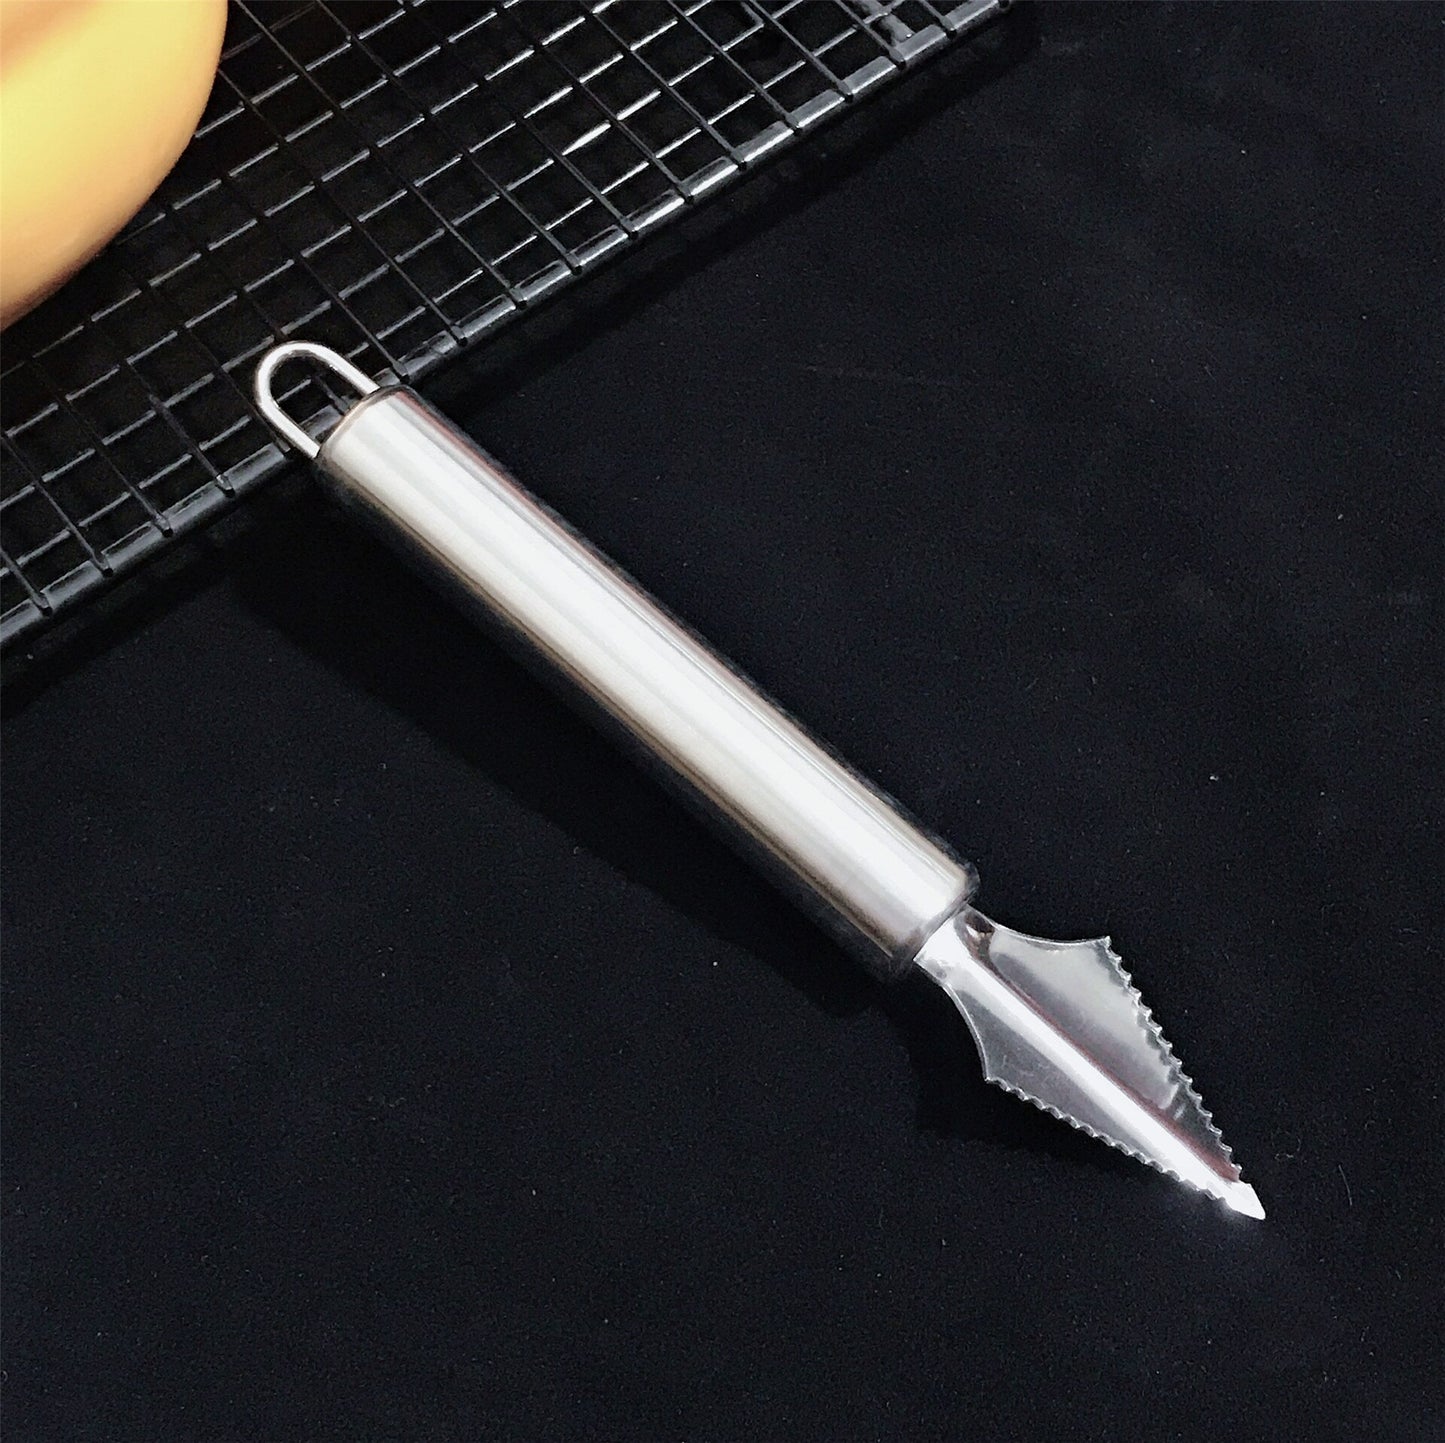 Stainless steel fruit carving shovel carving knife ice cream digger kitchen bar supplies carving tools for fruits and vegetables